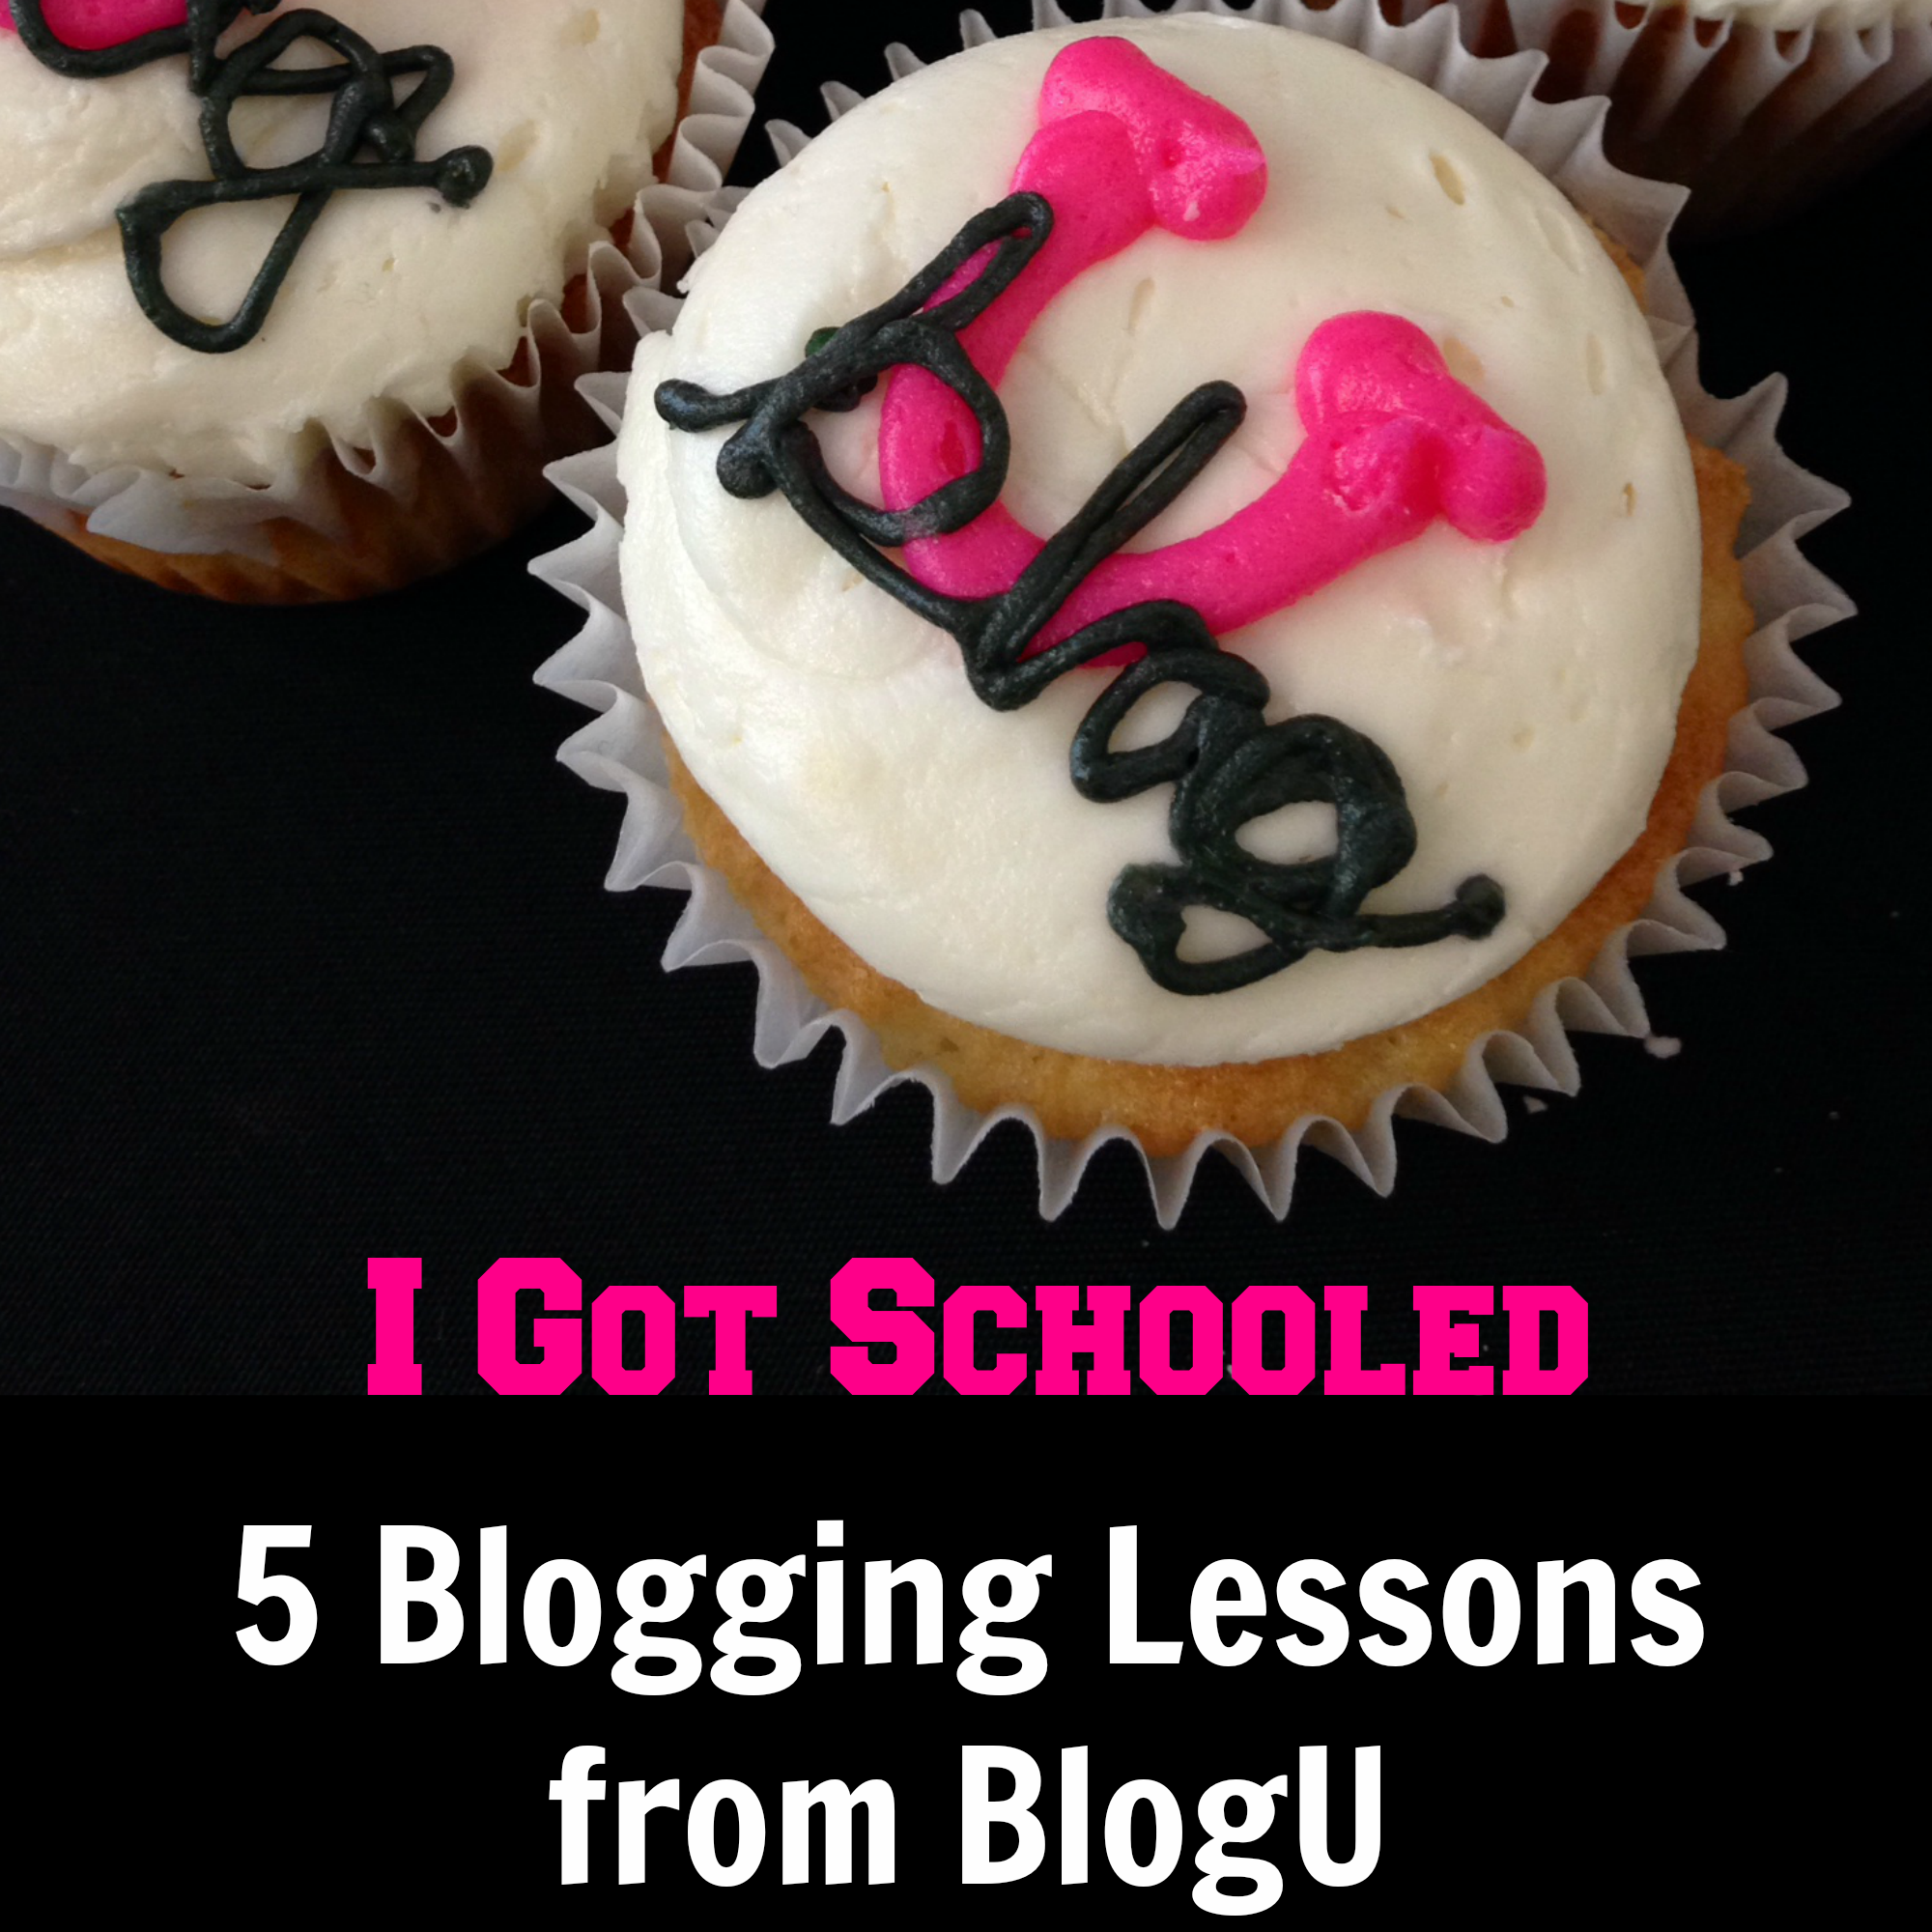 I Got Schooled: 5 Blogging Lessons from the BlogU Conference